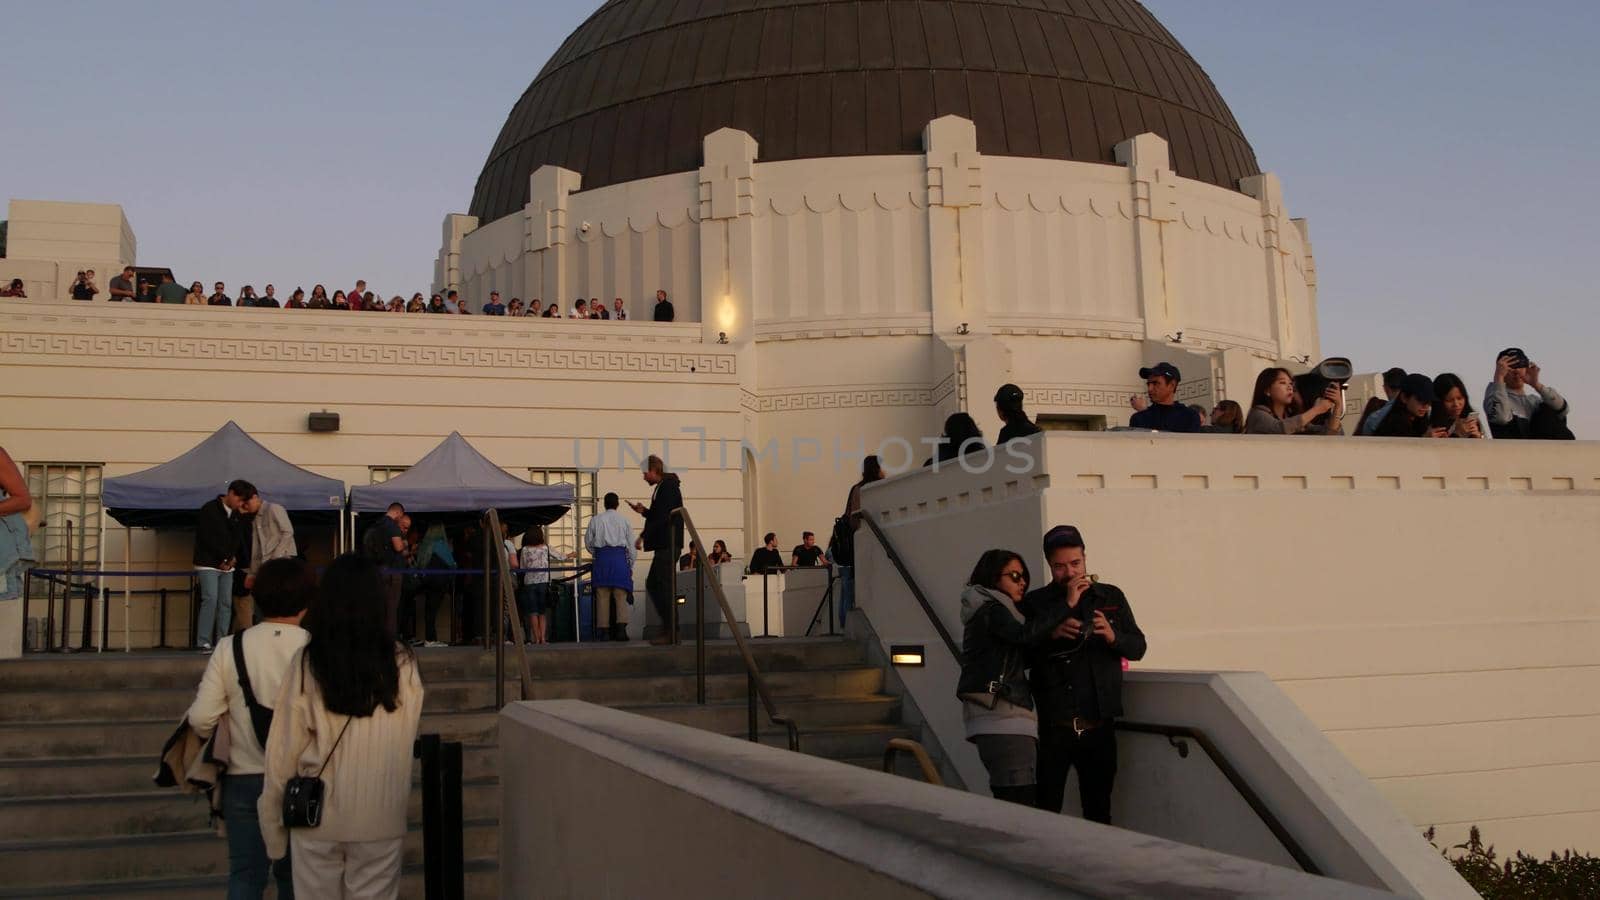 LOS ANGELES, CALIFORNIA, USA - 7 NOV 2019: Griffith observatory viewpoint. Crowd on vista point, people watching sunset over city and Hollywood sign. Many multiracial tourists look at golden sundown.